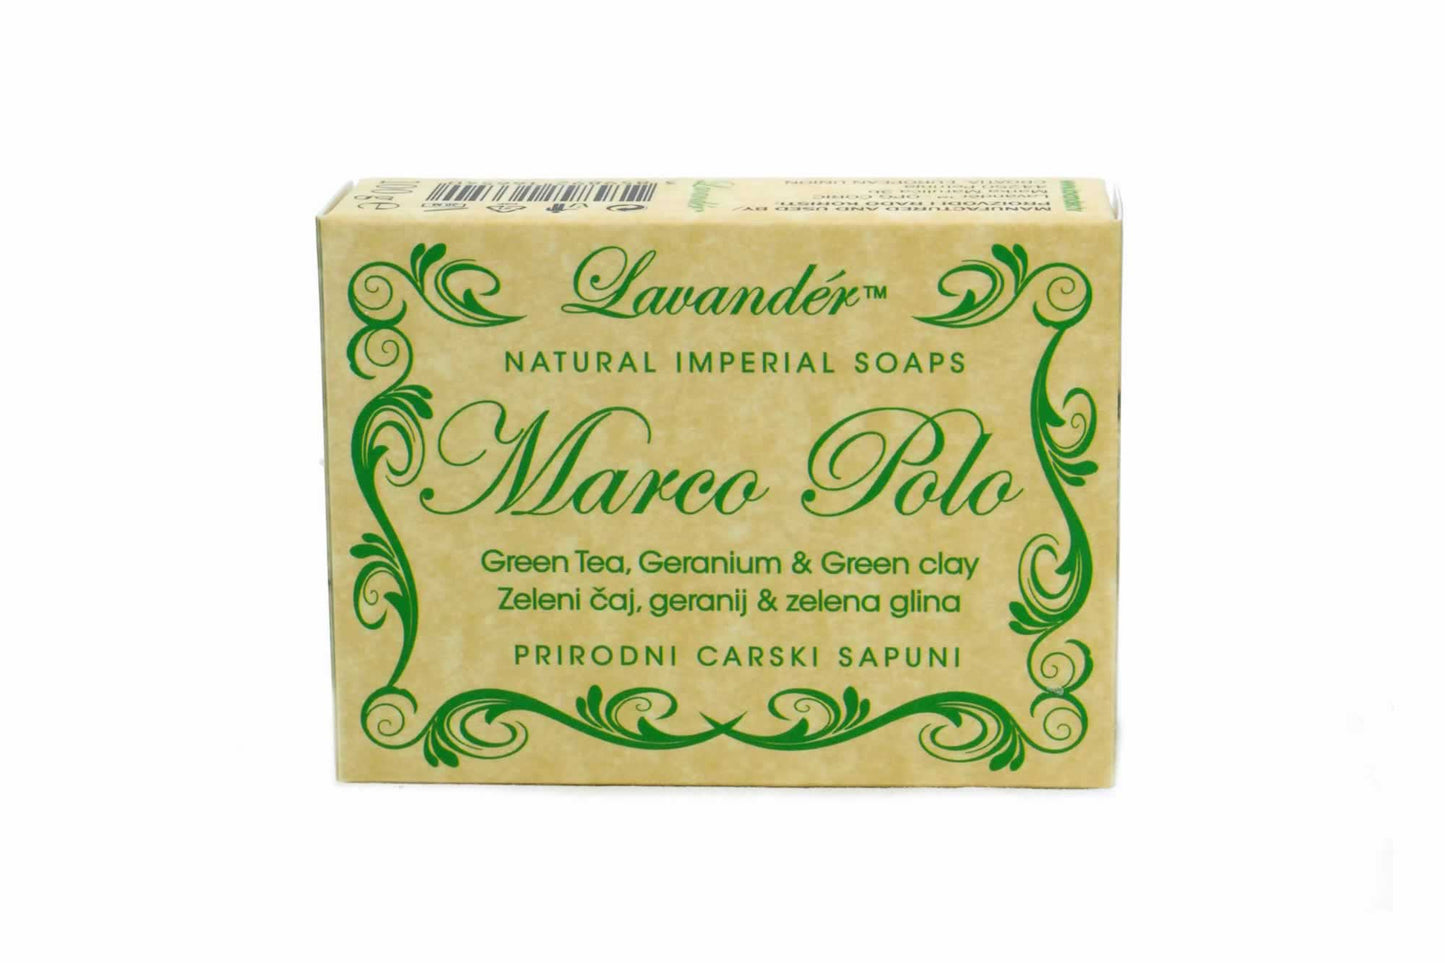 Soap with green clay, geranium and Marco Polo green tea